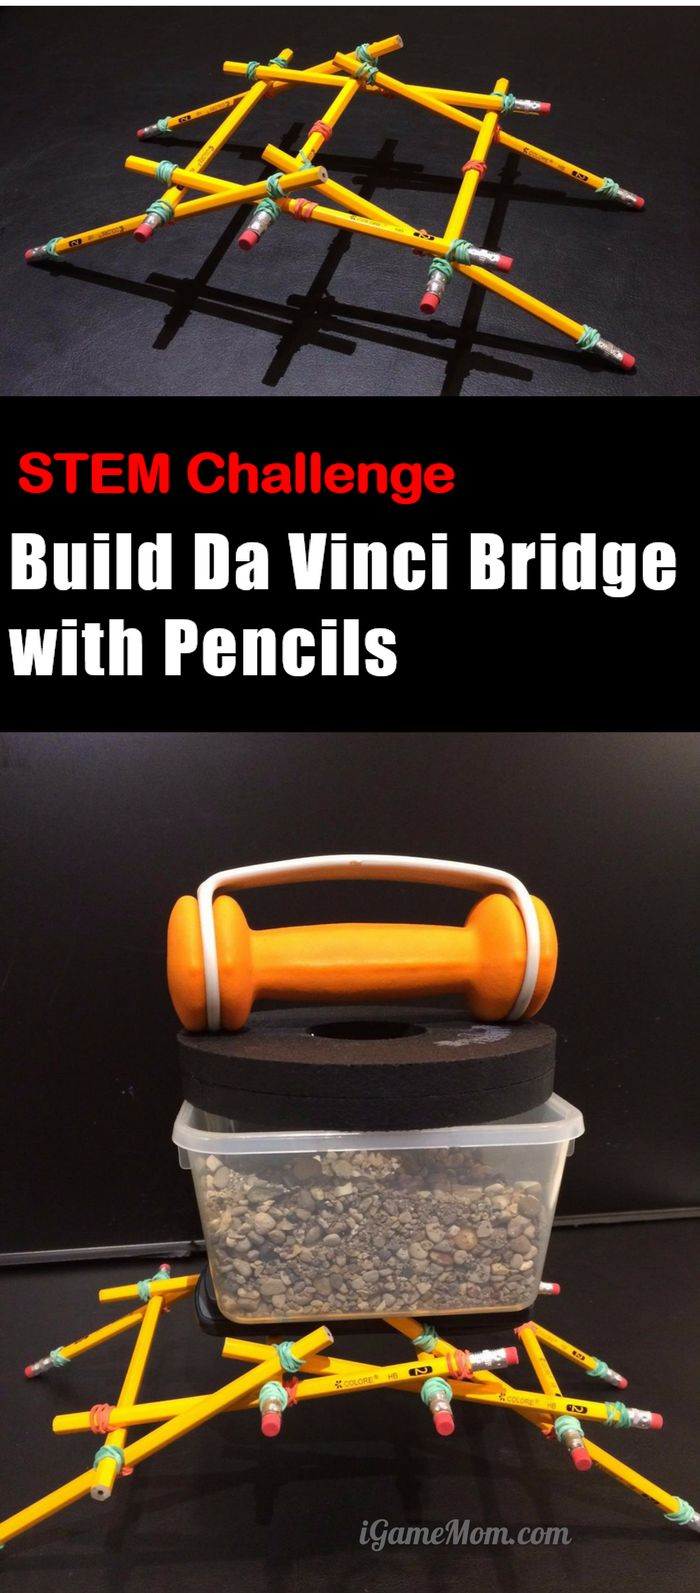 STEM Challenge for kids: build a Da Vinci bridge with pencils. Fun team project for a science class. Students learn engineering design process, physics, forces, fraction, gravity.